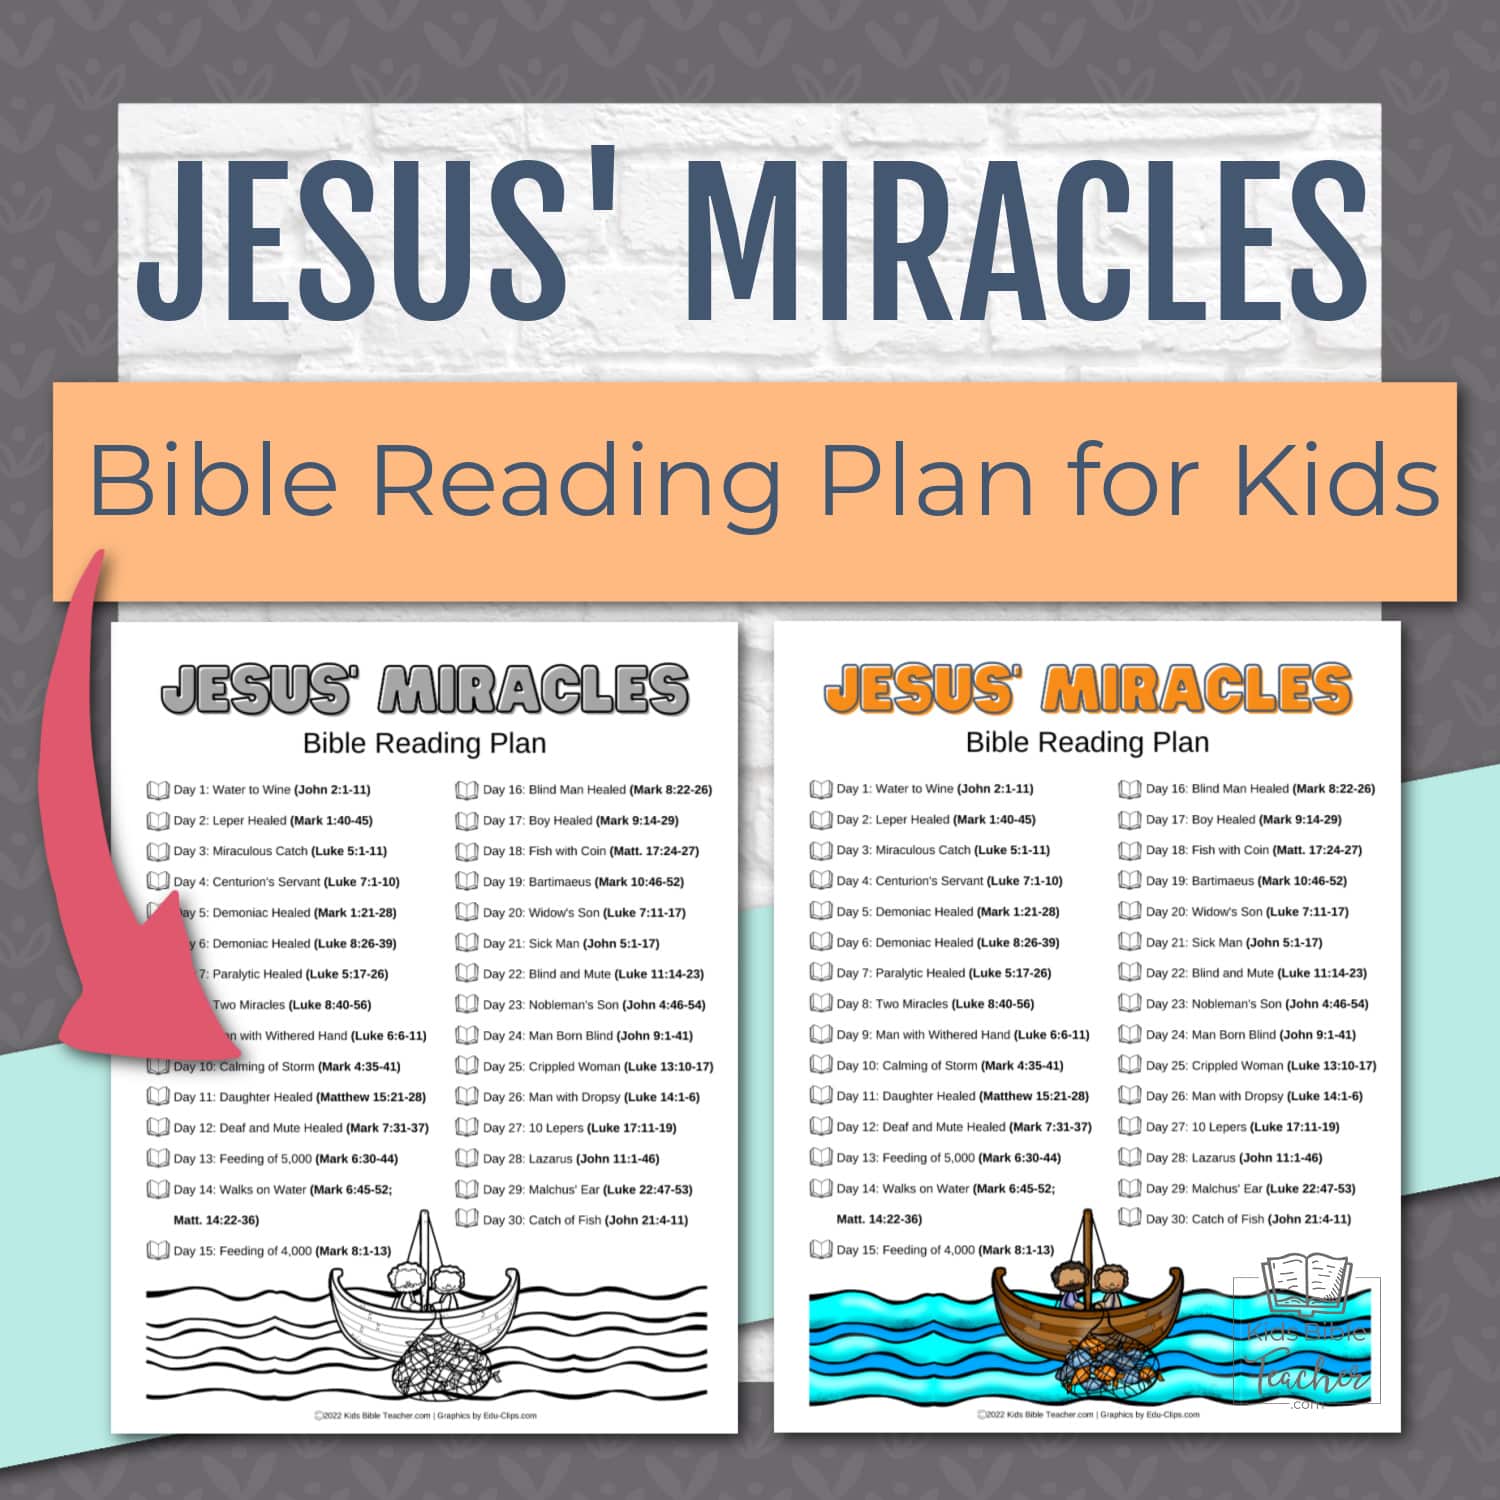 The Jesus' Miracles Bible Reading Plan will help your kids experience Jesus' miracles straight from the pages of the Bible!